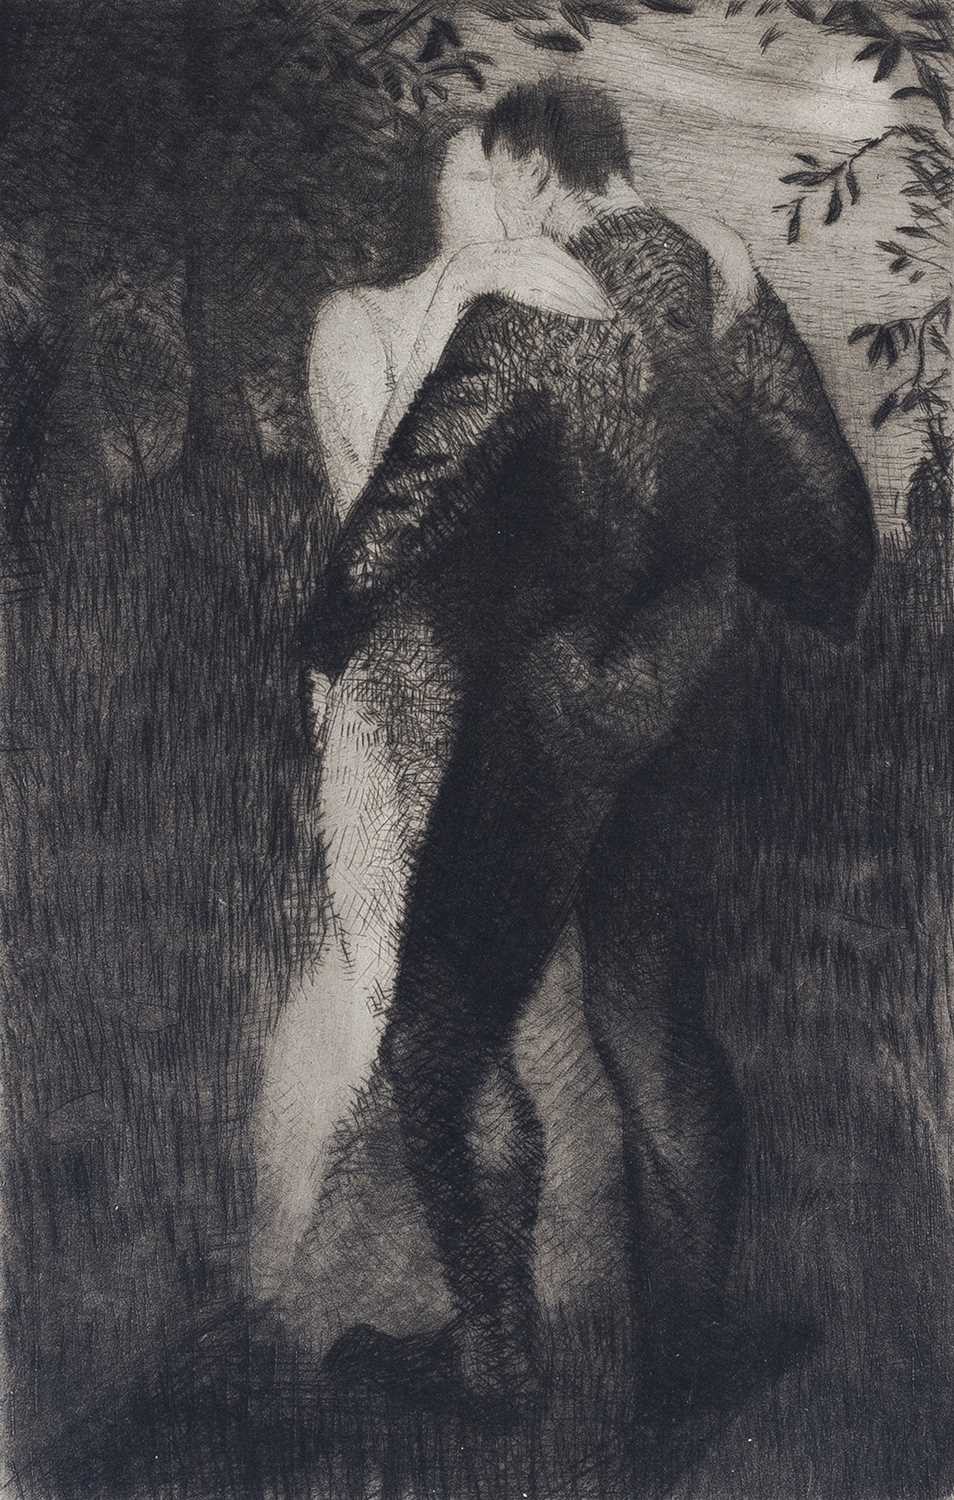 CHRISTOPHER RICHARD WYNNE NEVINSON SIGNED ETCHING 1919 "LOVERS"